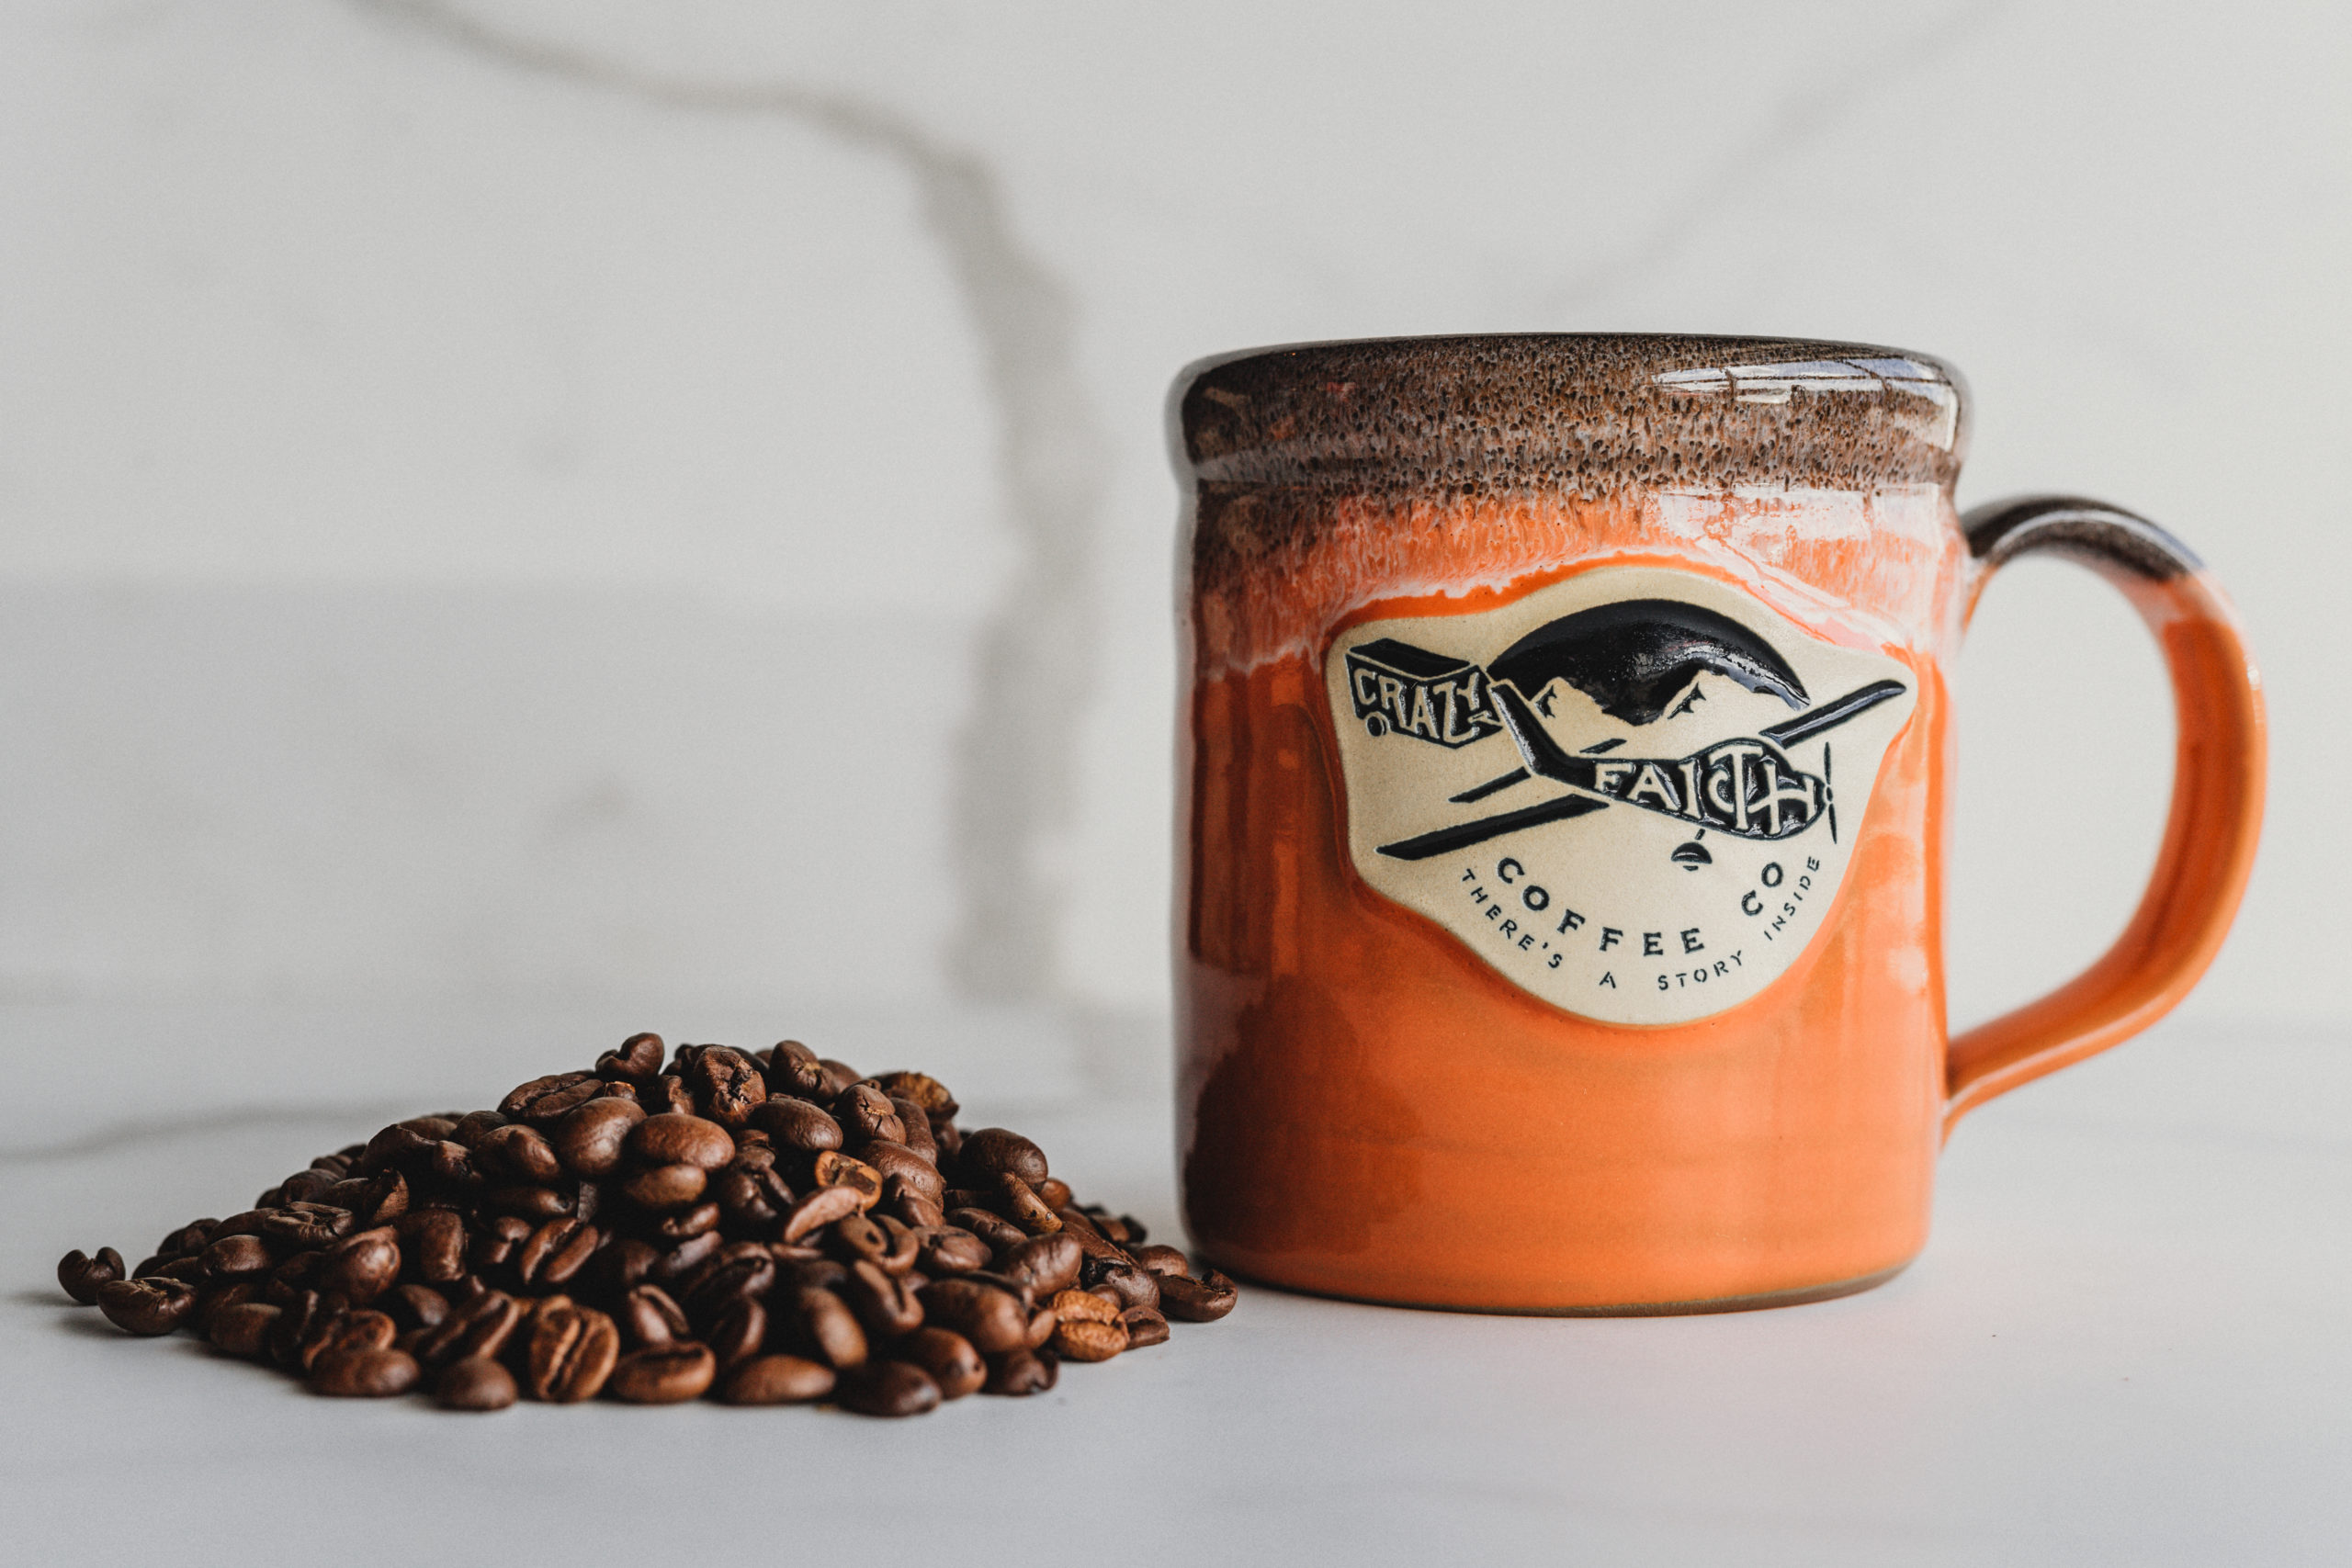 Orange and brown Crazy Faith coffee cup next to coffee beans